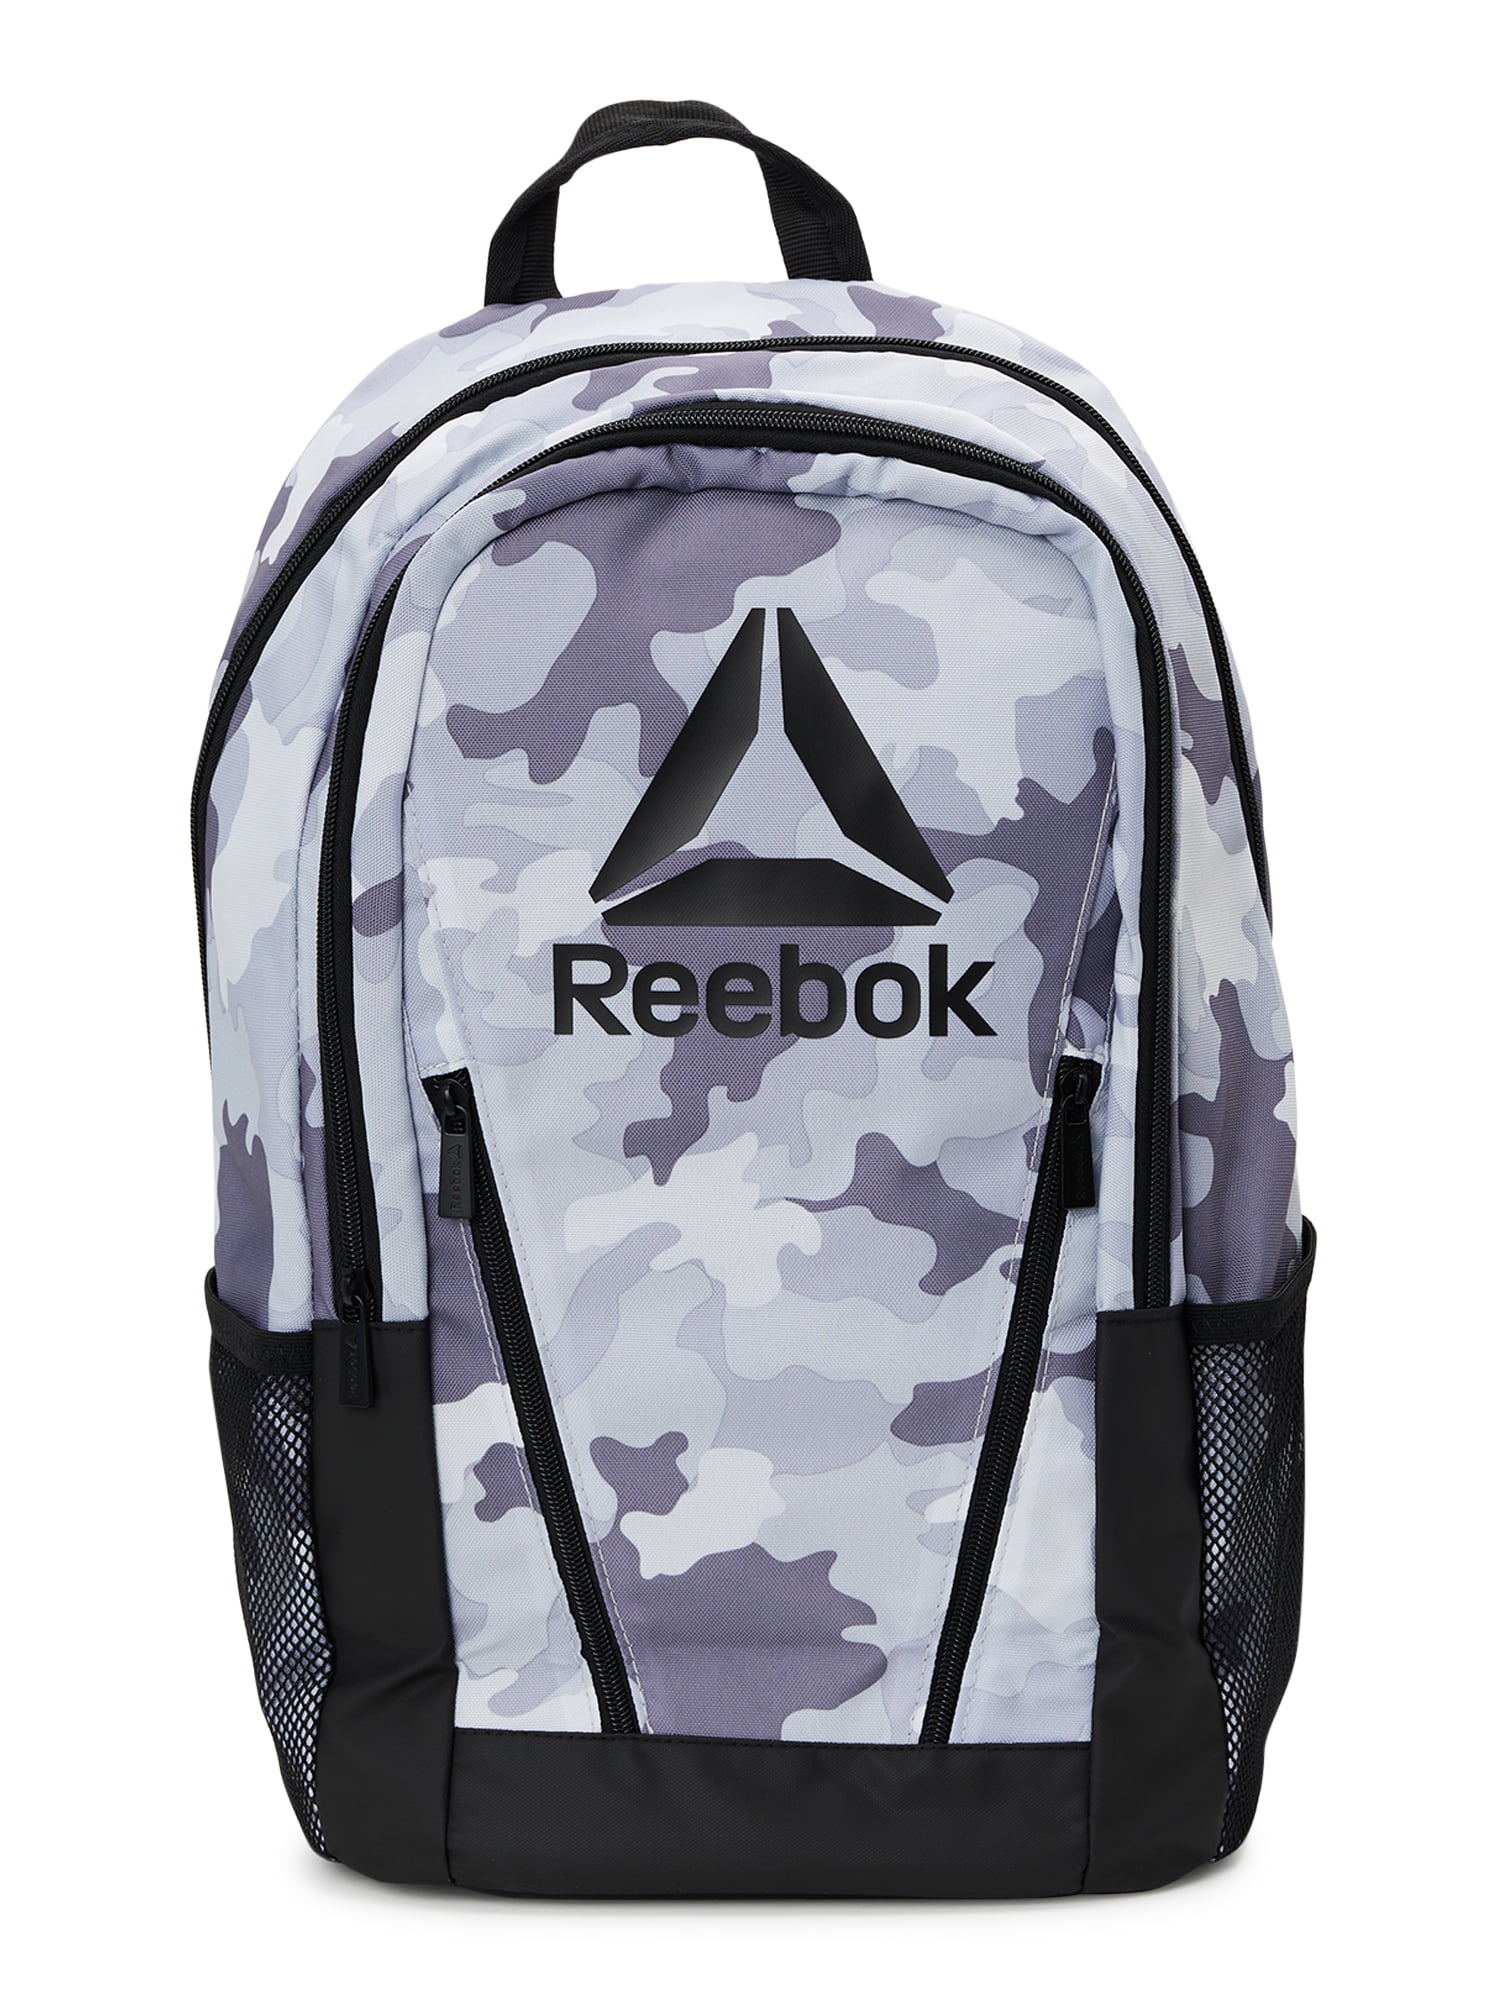 S t pase a ver Plata Reebok Unisex Adult Silas 19.5" Laptop Backpack, Light Gray Camouflage -  Walmart.com